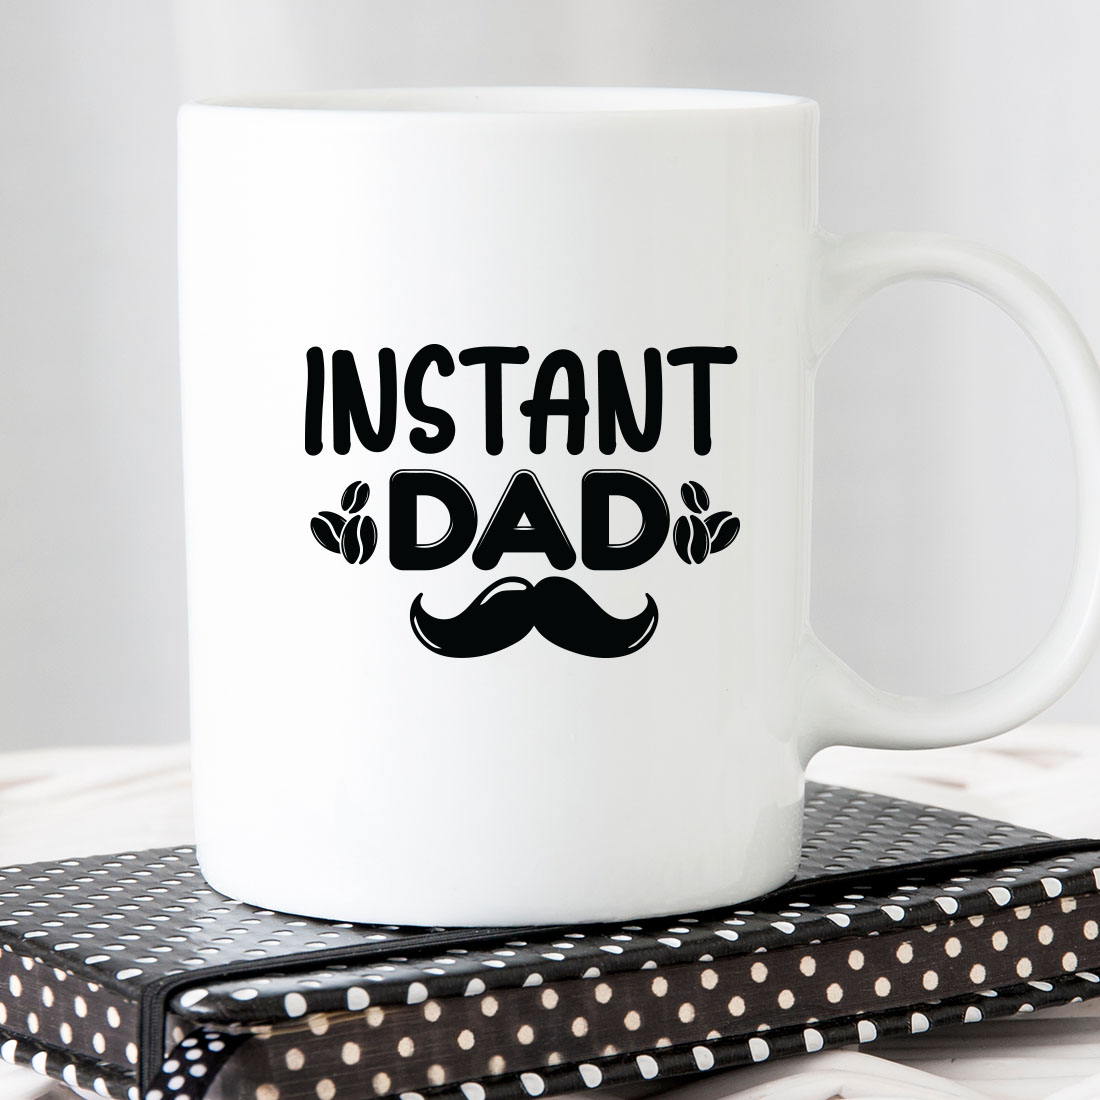 White coffee mug with the words instant dad on it.